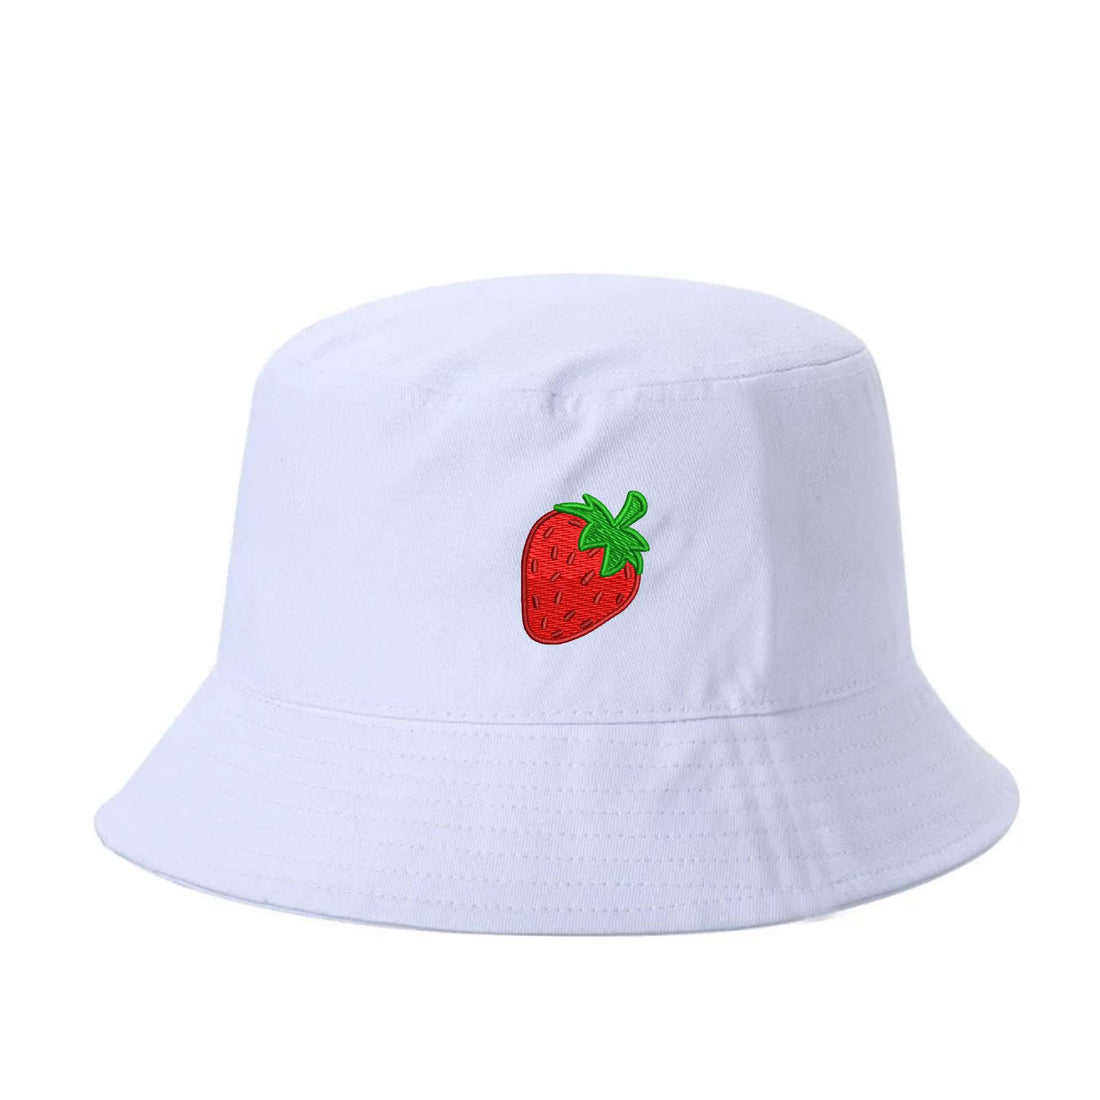 White Bucket Hat embroidered with a strawberry - DSY Lifestyle